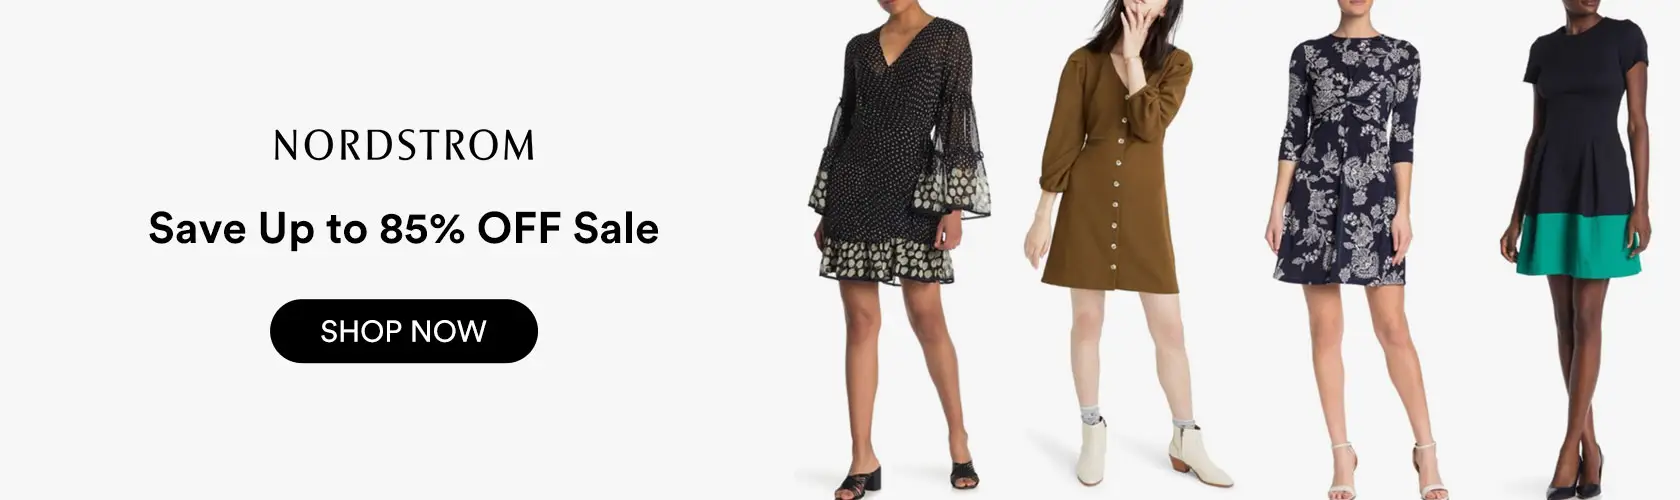 Nordstrom: Up to 85% OFF Sale